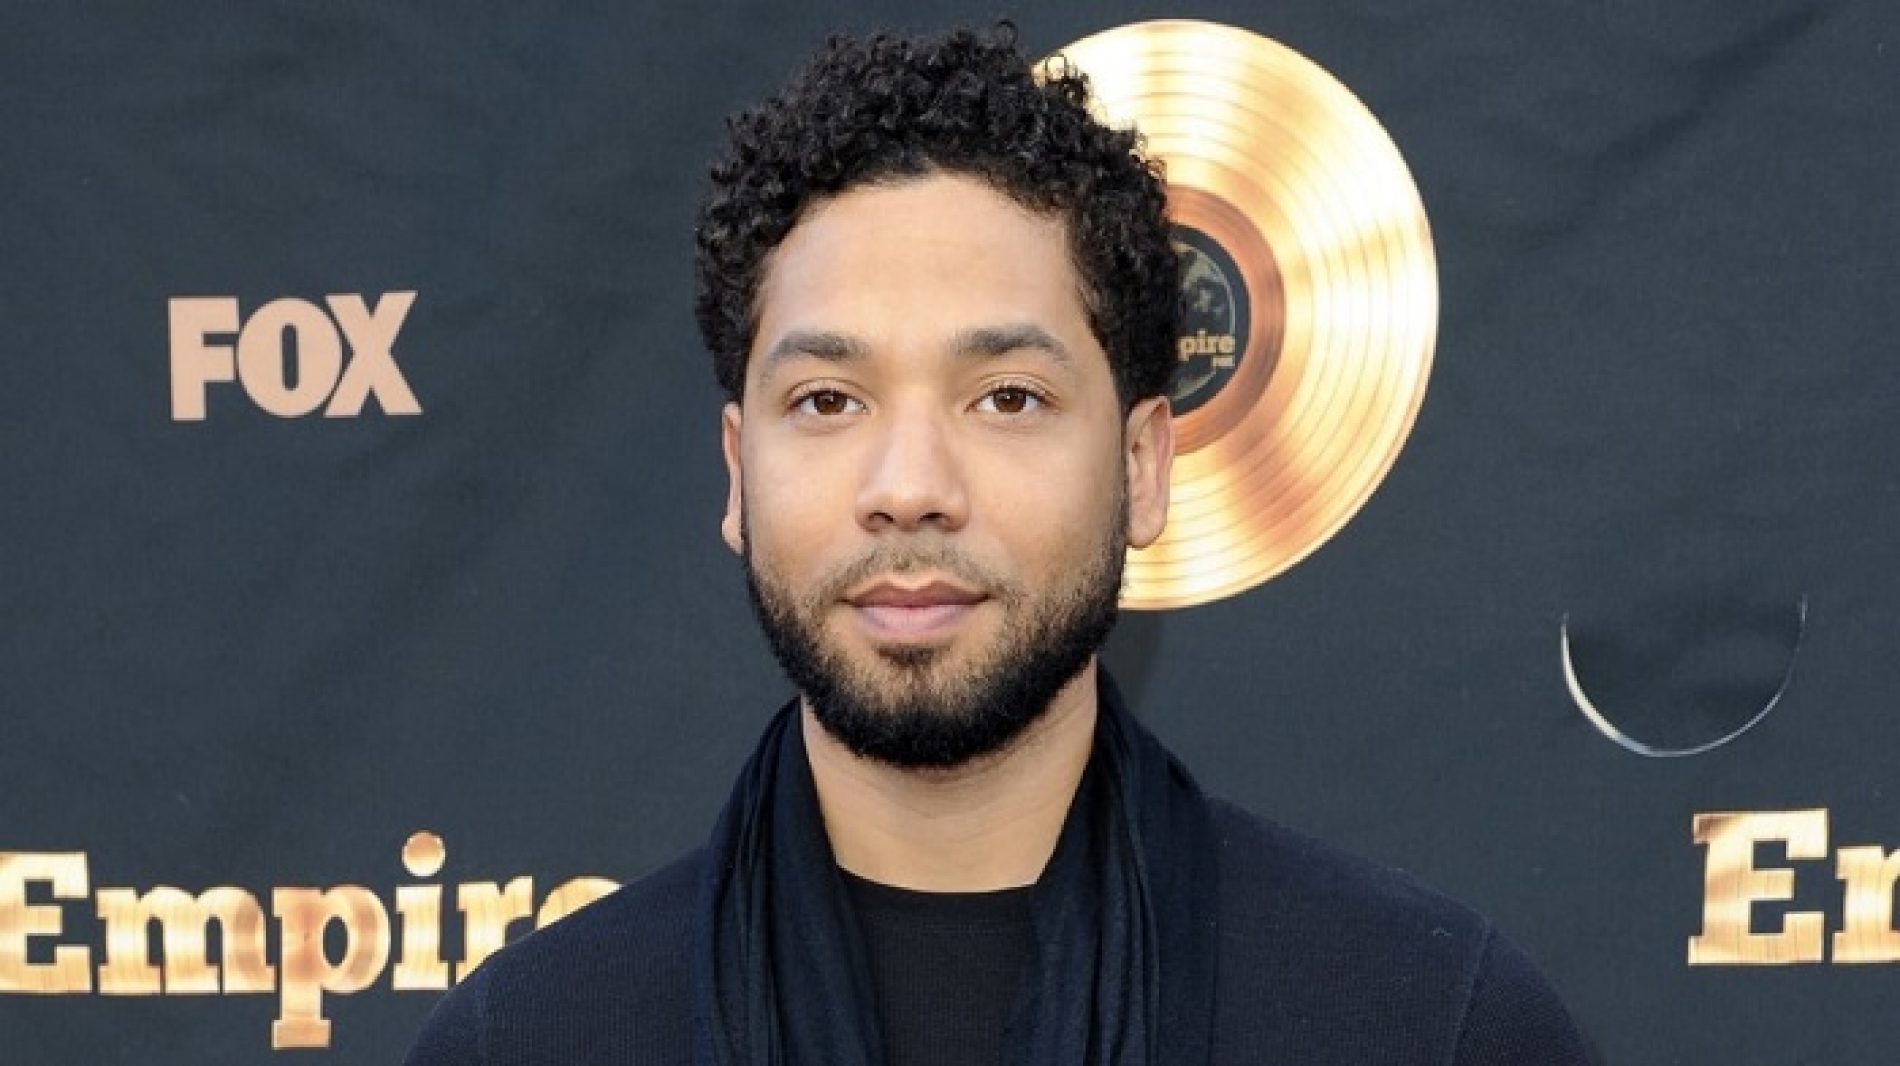 Actor Jussie Smollett Becomes A Victim Of Homophobic Attack By MAGA Supporters